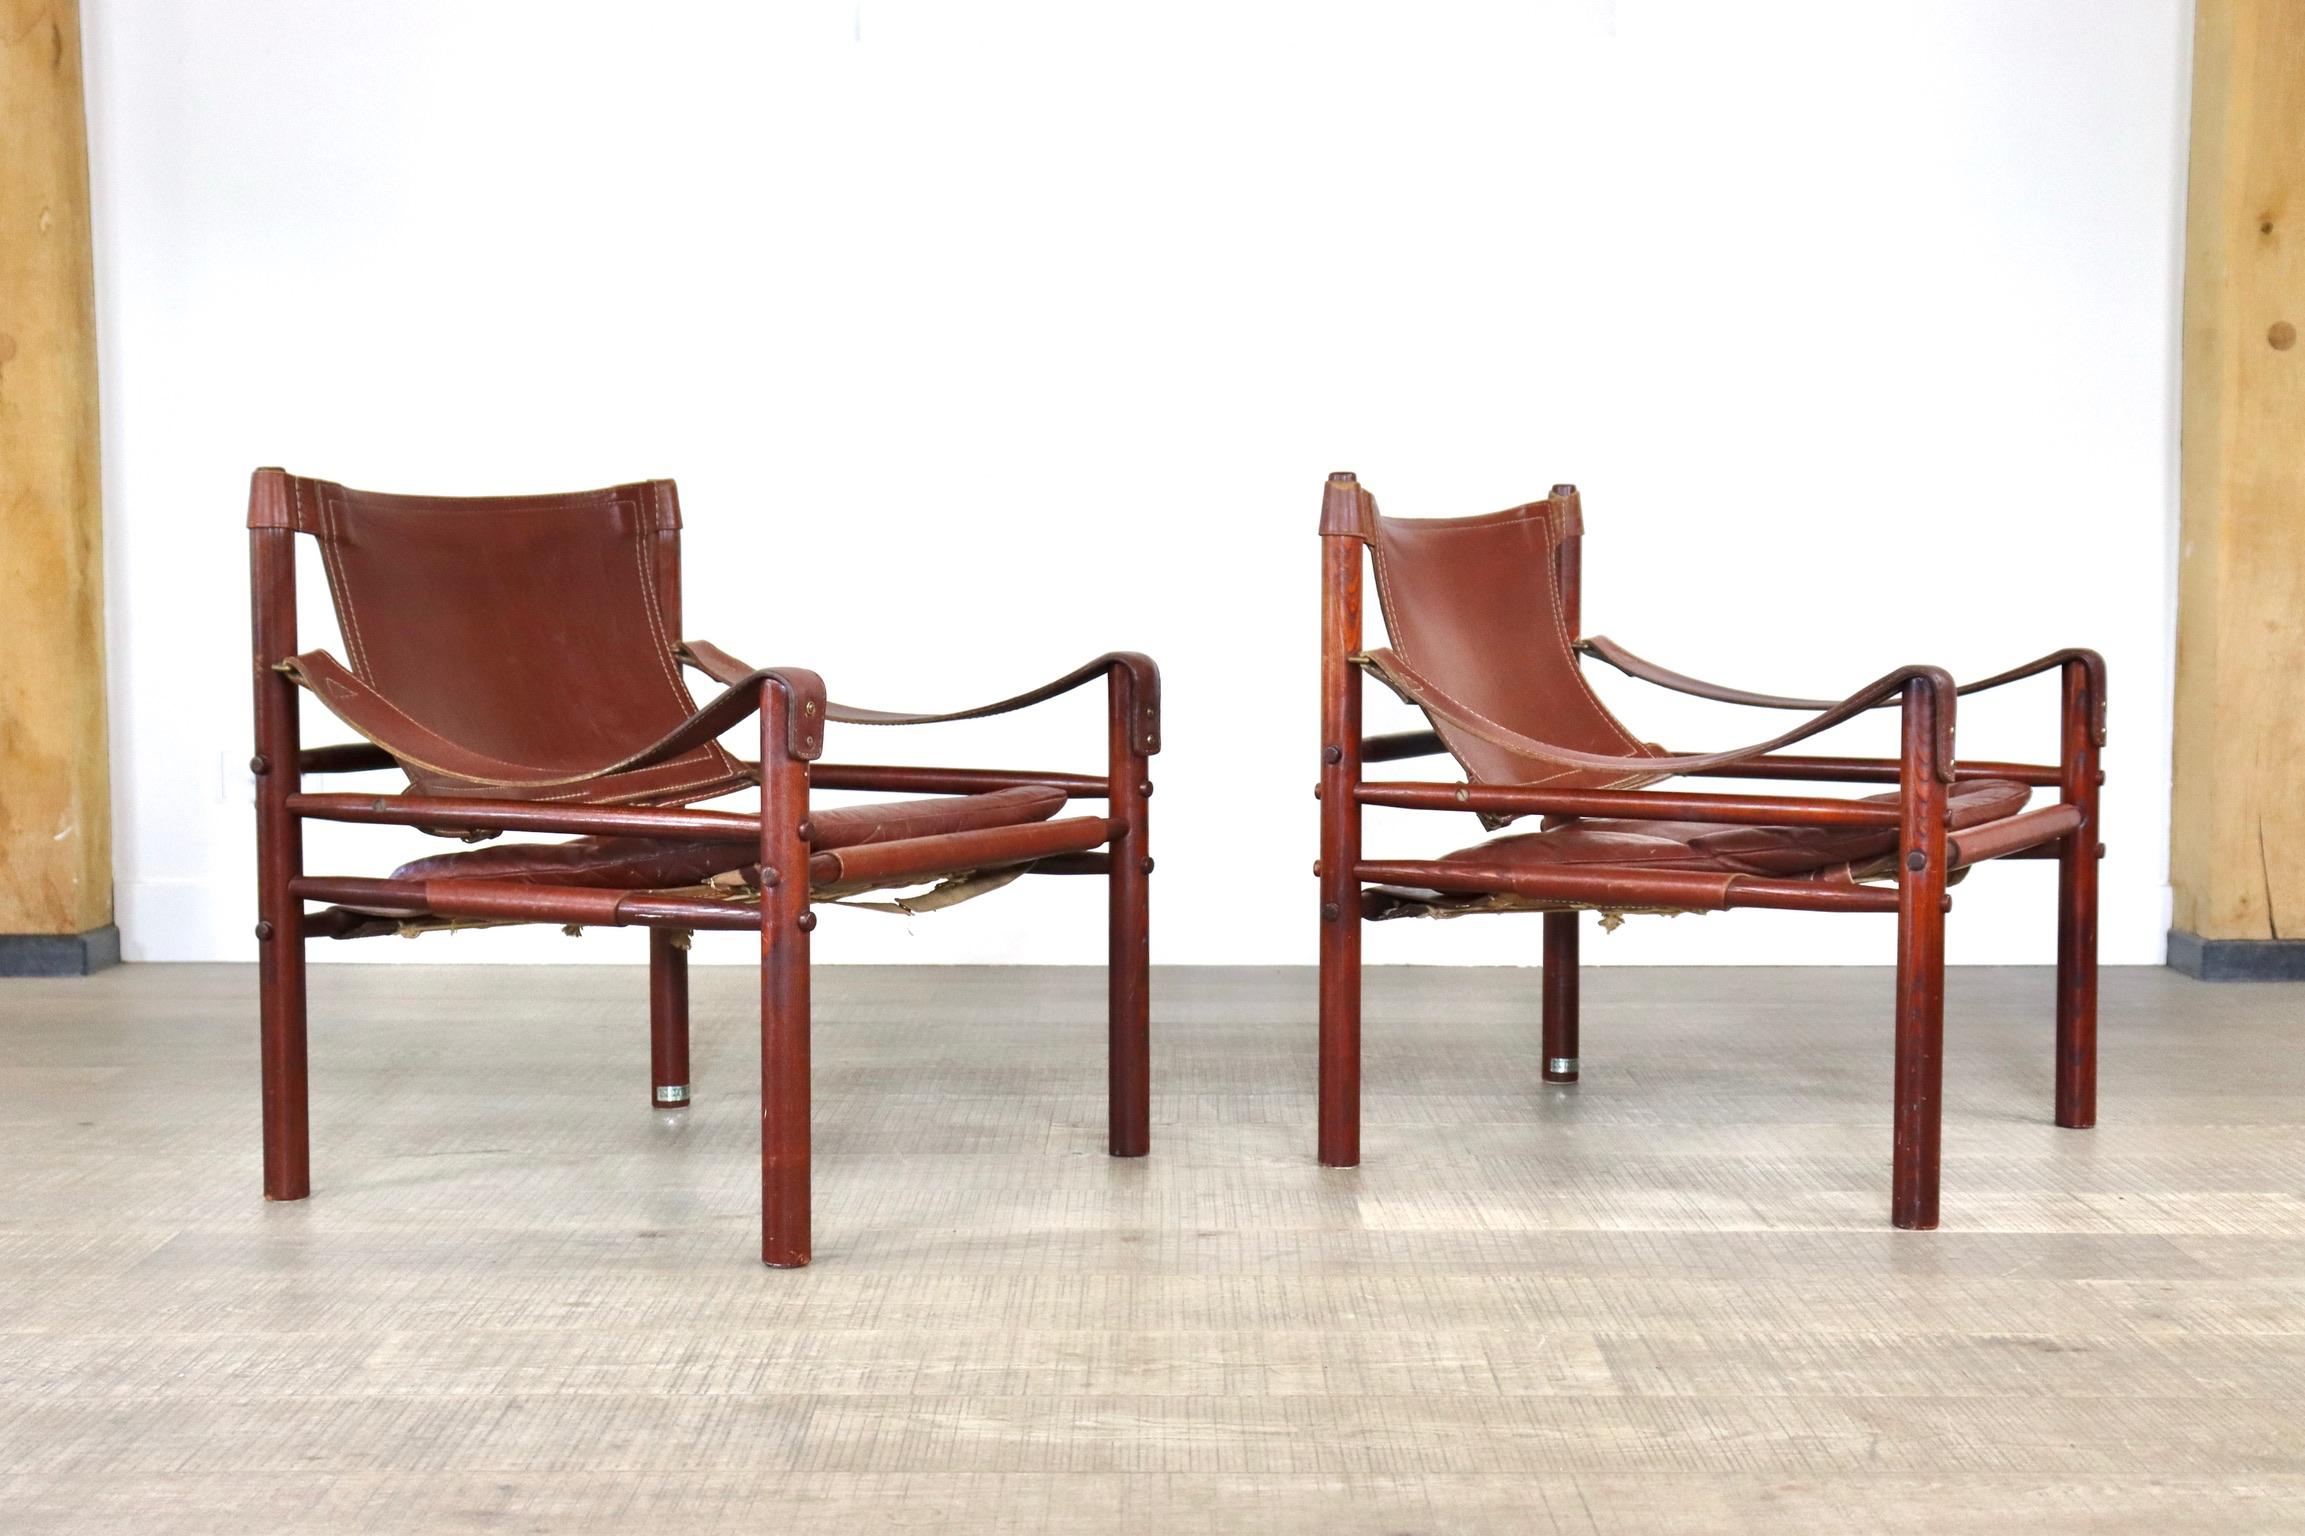 Pair of easy chairs model Sirocco in cognac leather designed by Arne Norell, Produced by Arne Norell AB in Aneby, Sweden. 
The chairs are made of a lacquered Ash wood frame and original cognac leather seating and armrests. 
Stunning design to